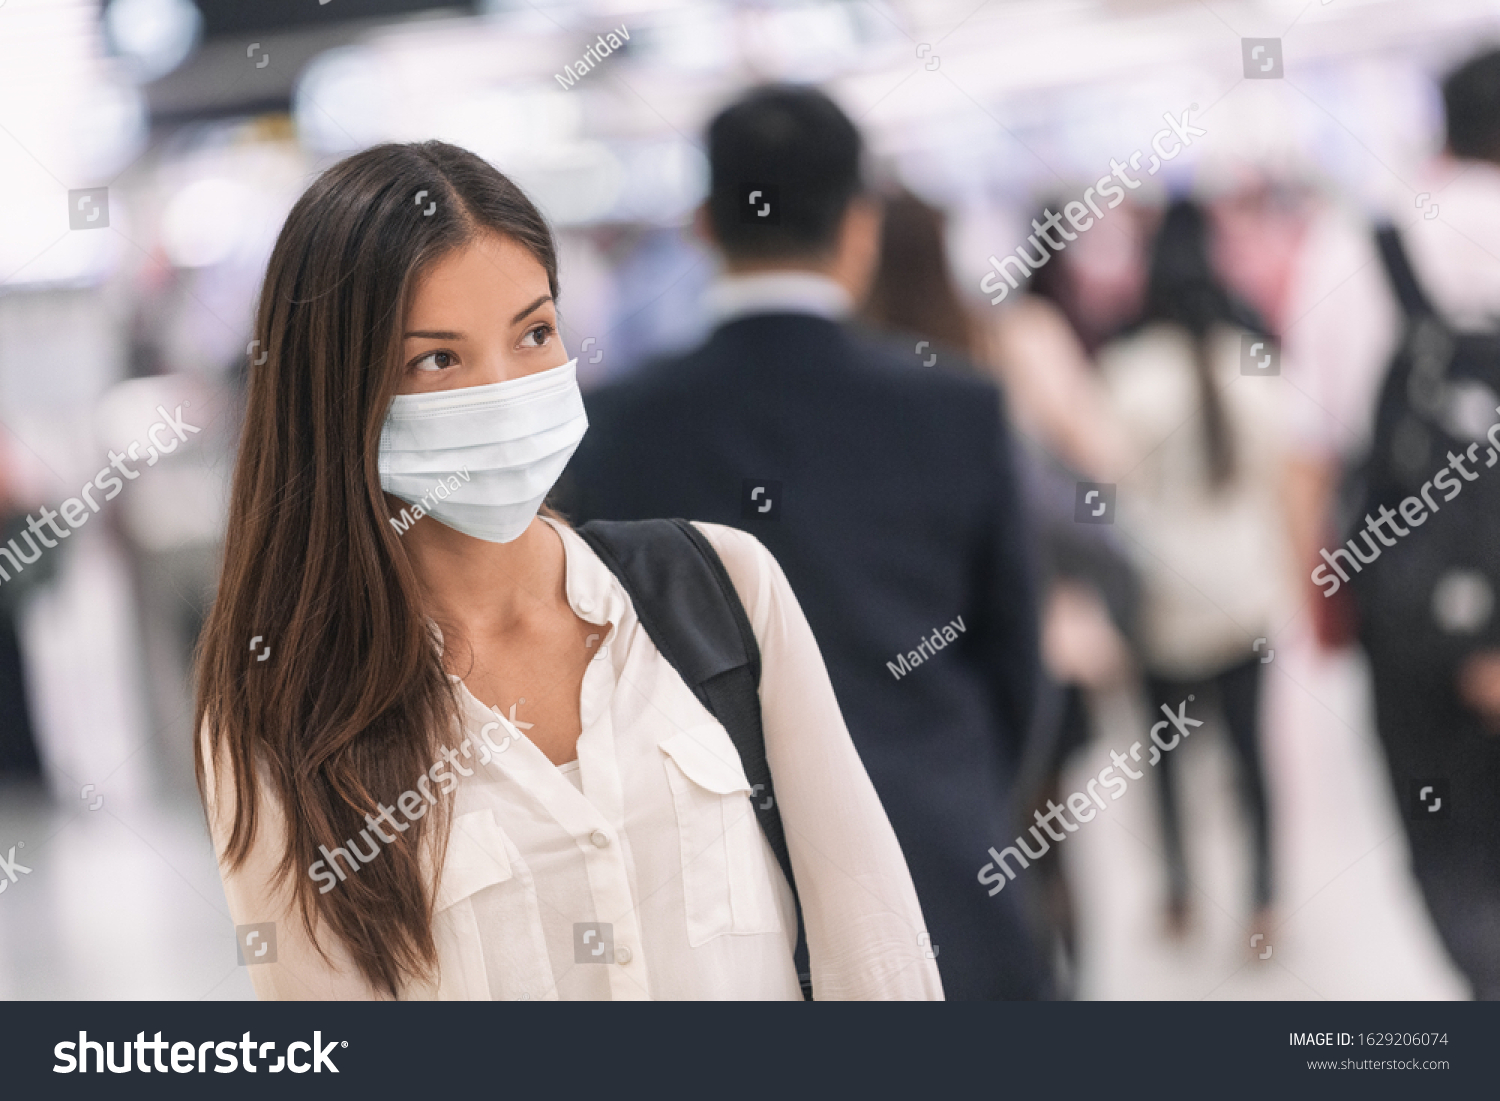 Virus mask Asian woman travel wearing face protection in prevention for coronavirus in China. Lady walking in public space bus station or airport. #1629206074